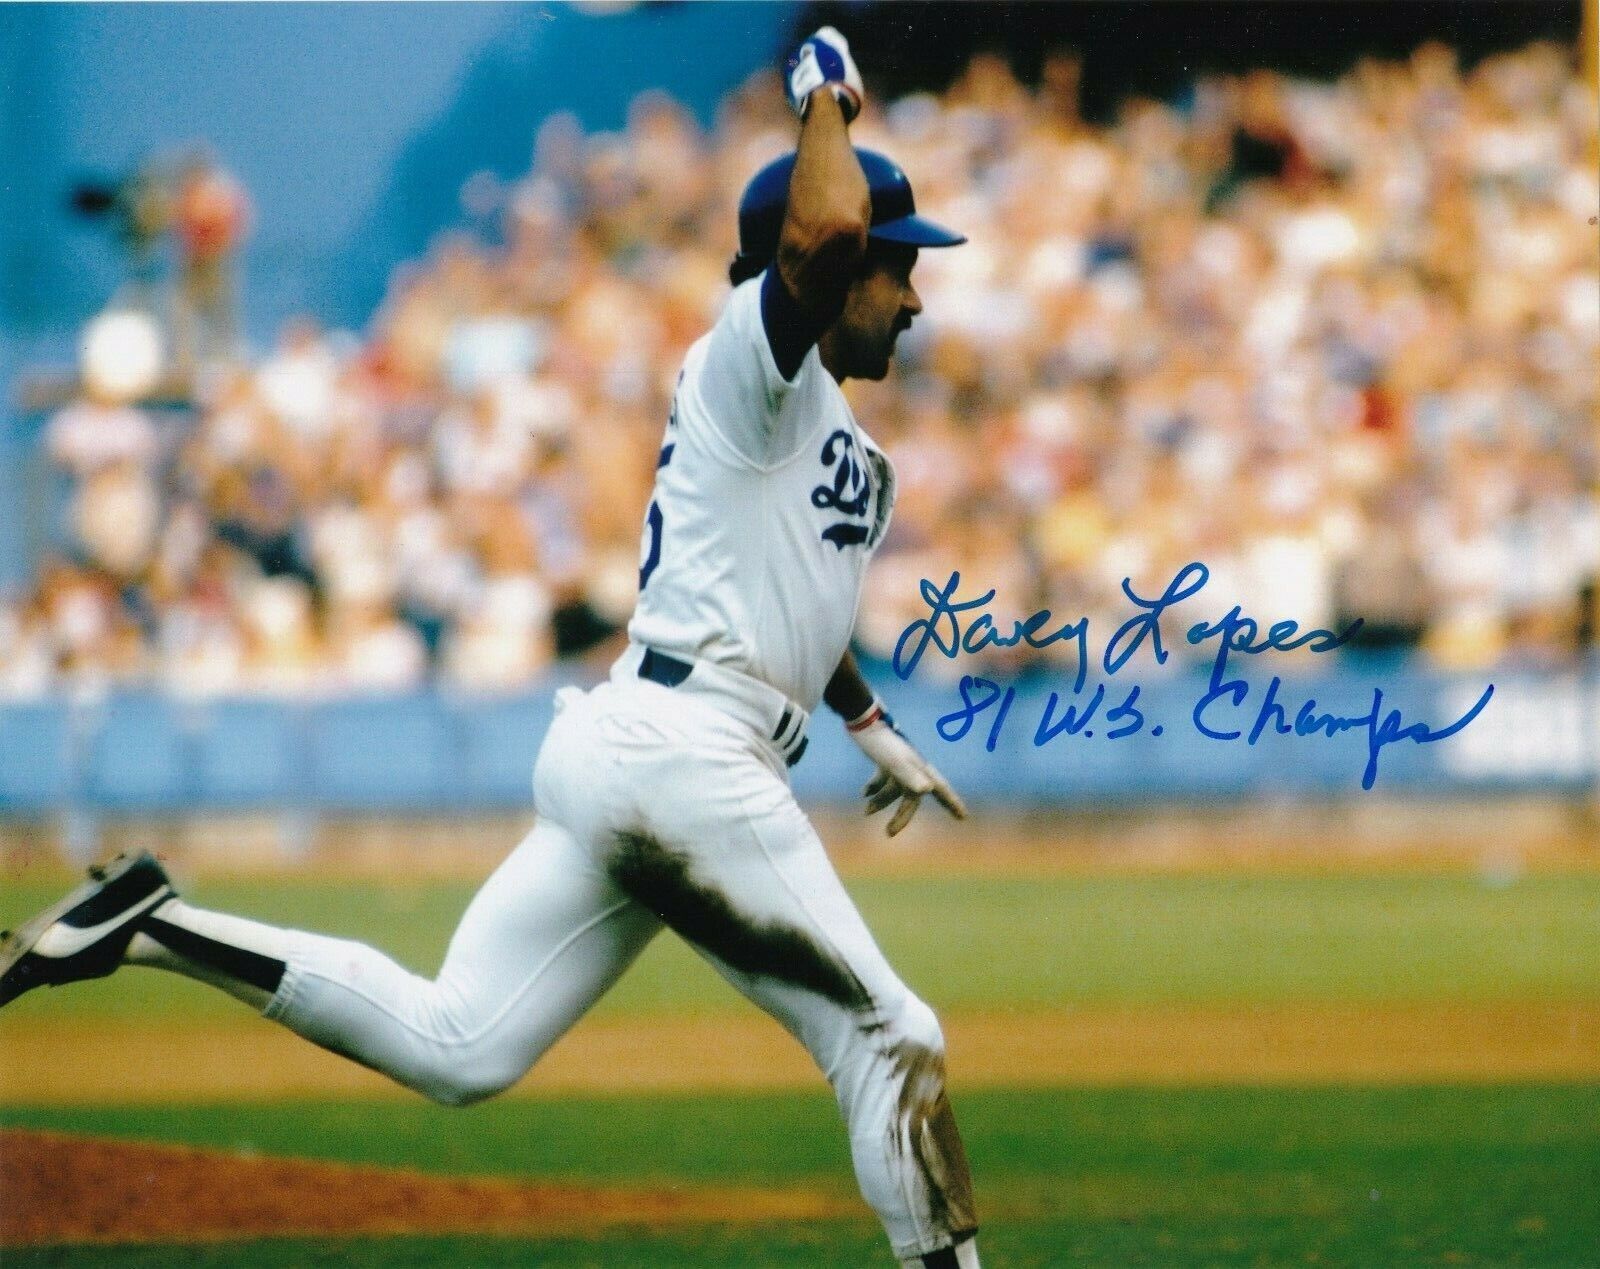 DAVEY LOPES LOS ANGELES DODGERS 81 WS CHAMPS ACTION SIGNED 8x10